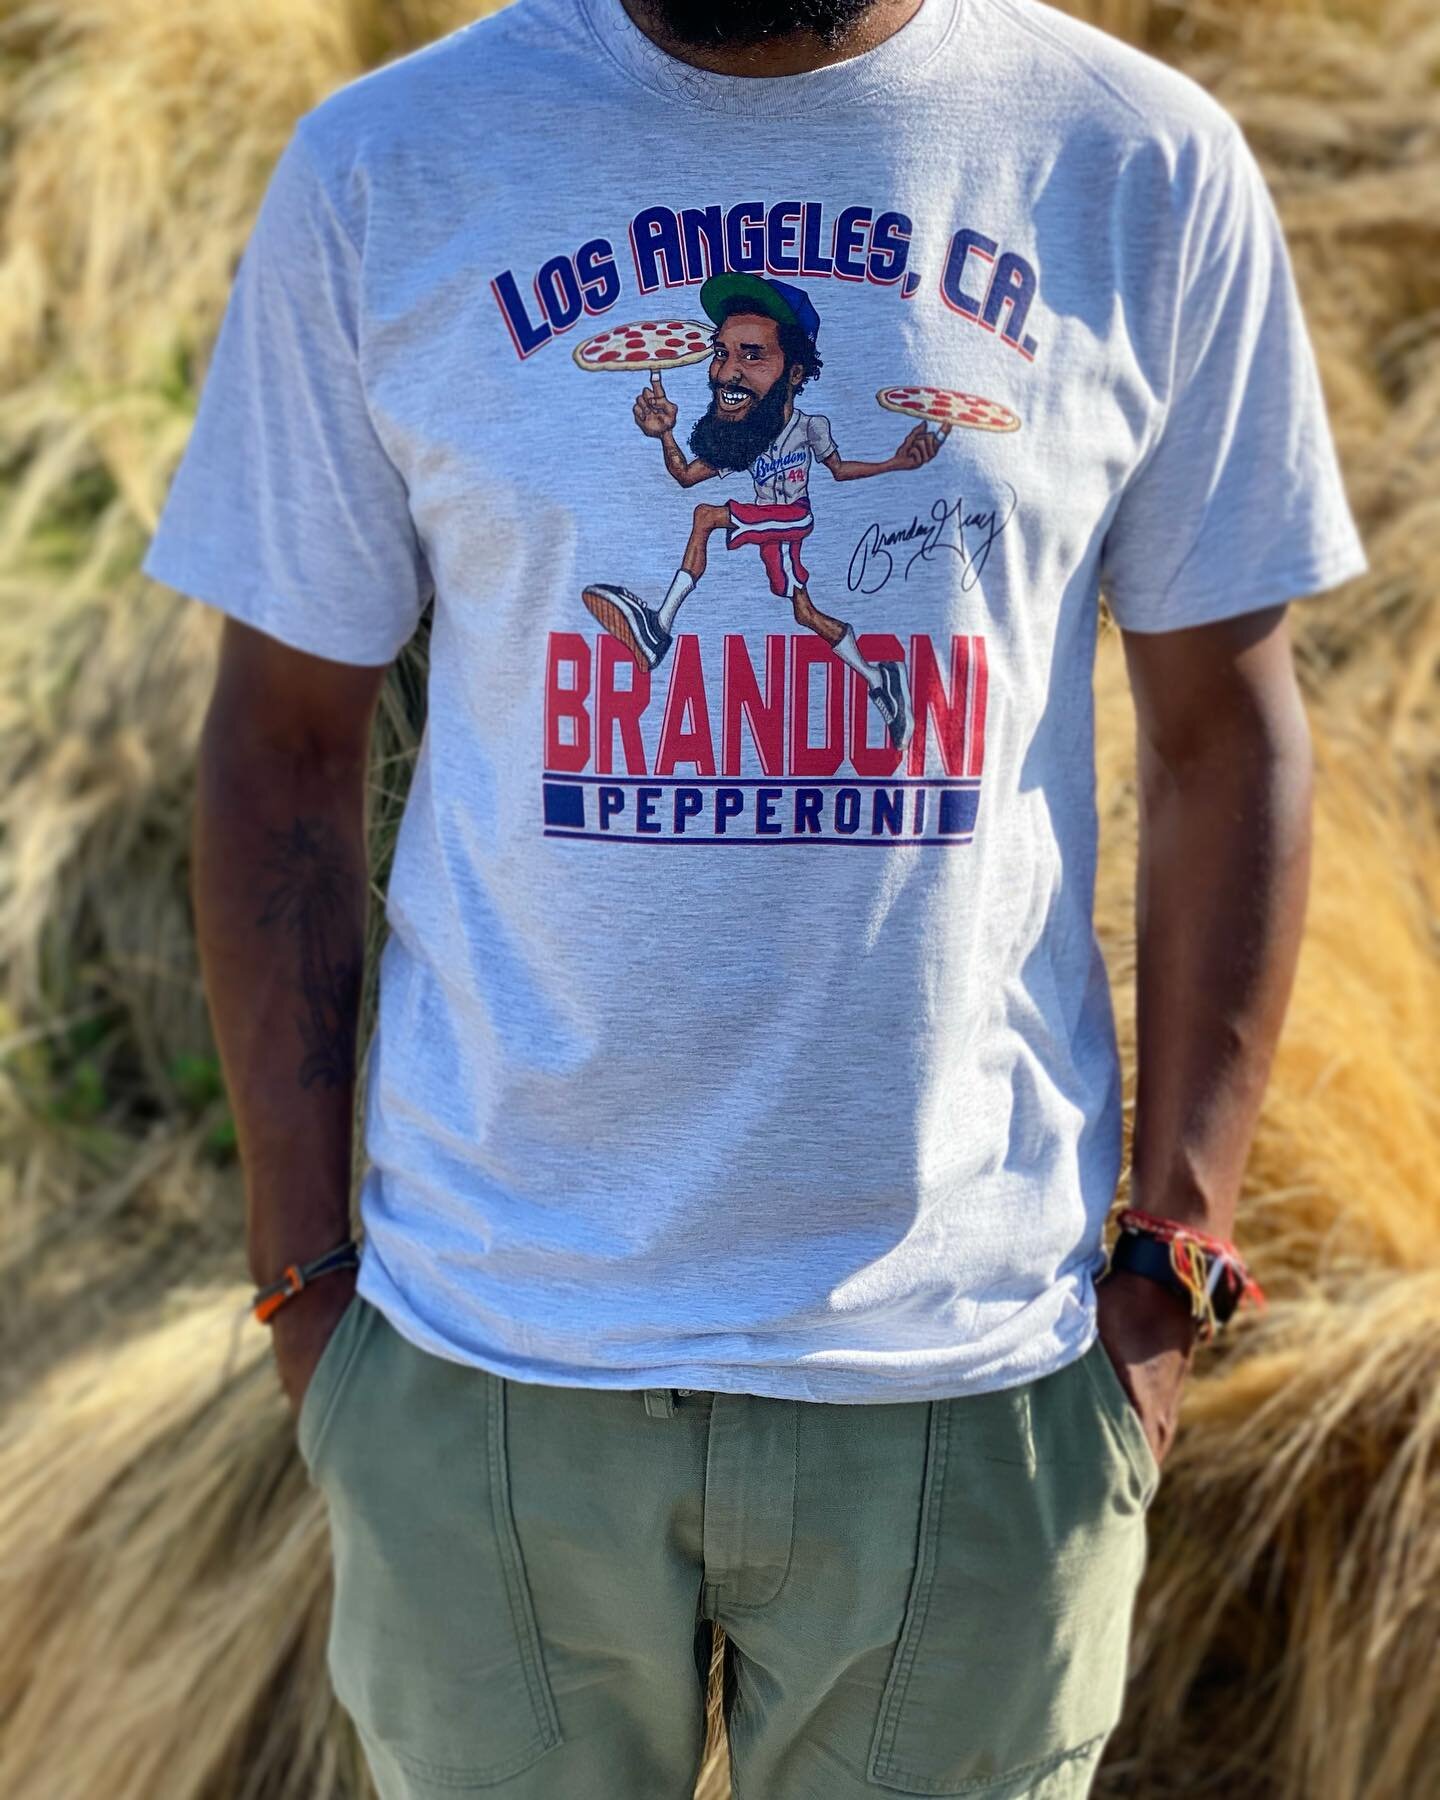 The wait is finally over!

Come one, come all. Now slingin&rsquo; Za&rsquo;s 🍕🍕, Ebbets Field hats, and early 90&rsquo;s inspired caricature T-shirts the Brandoni way. 

All sizes available S-XXXL

ALL (shirts) go off to the artist @mikeybonanno